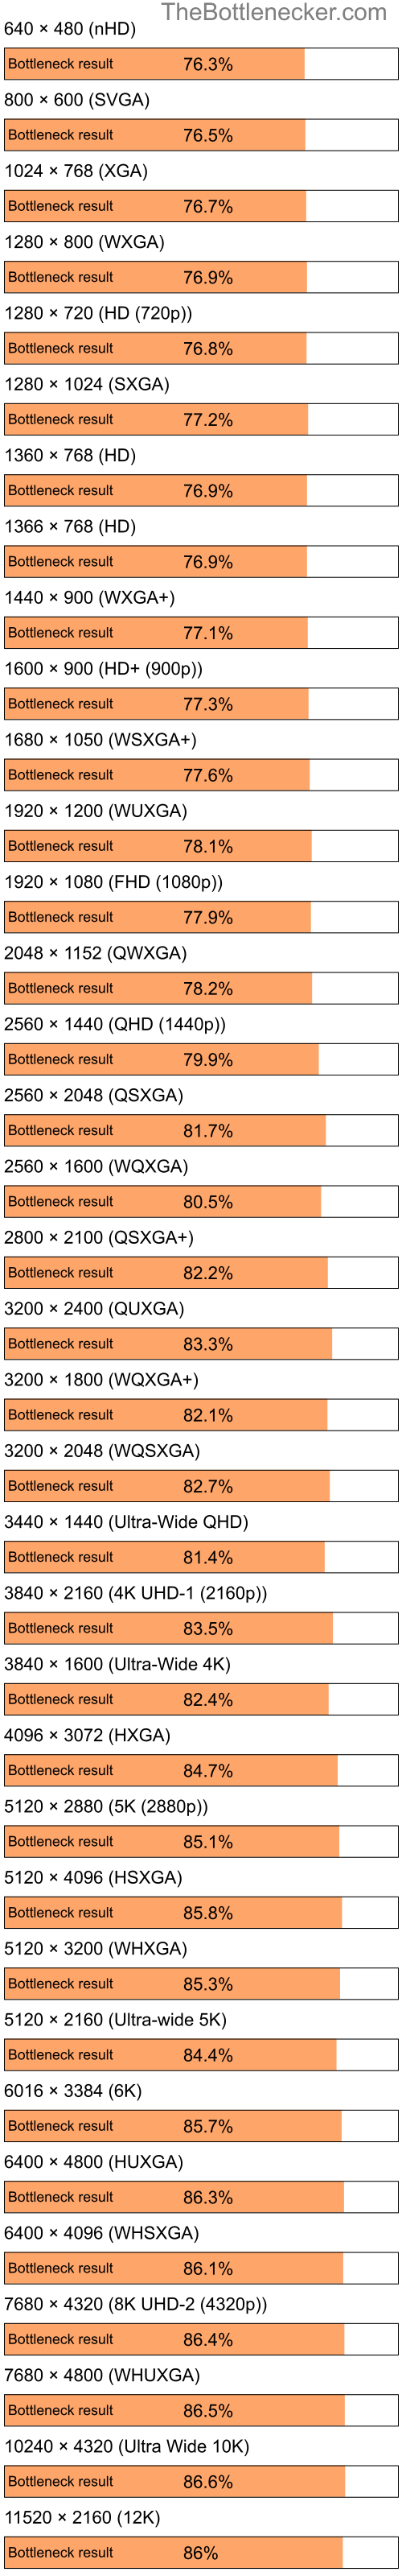 Bottleneck results by resolution for Intel Atom Z520 and AMD Radeon XPRESS 200 in General Tasks